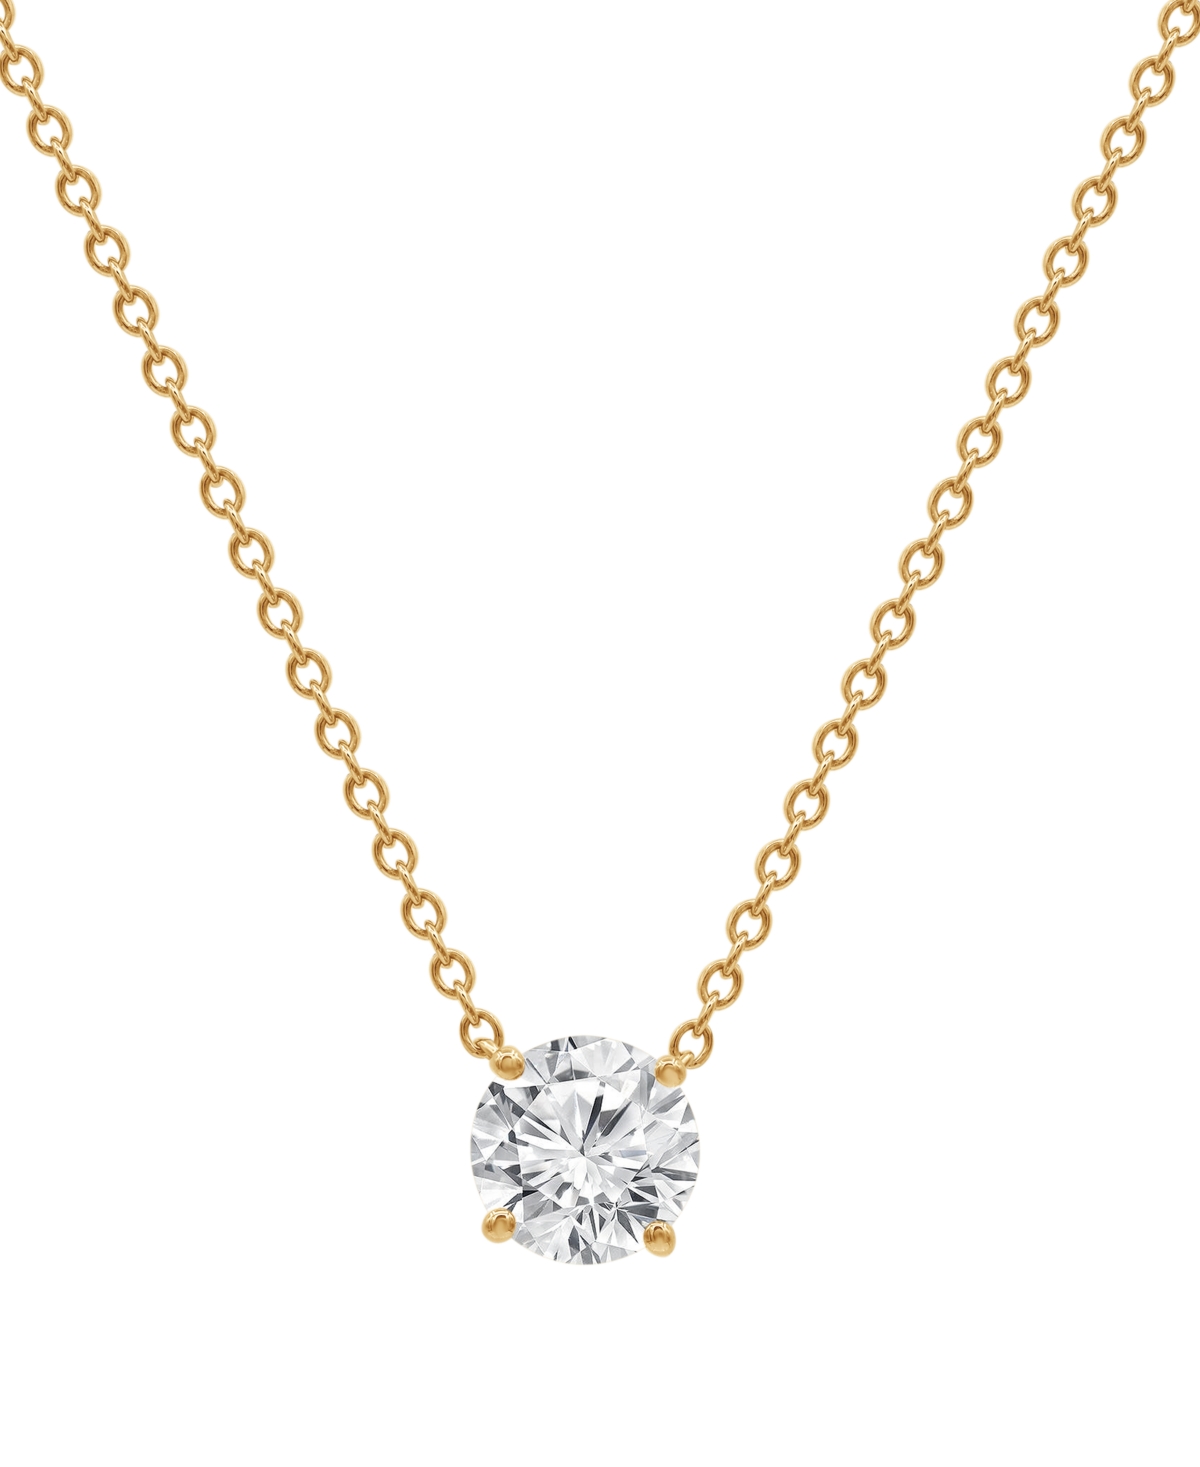 Certified Lab Grown Diamond Solitaire Adjustable 18" Pendant Necklace (1-1/2 ct. t.w.) in 14k Gold - Yellow Gold